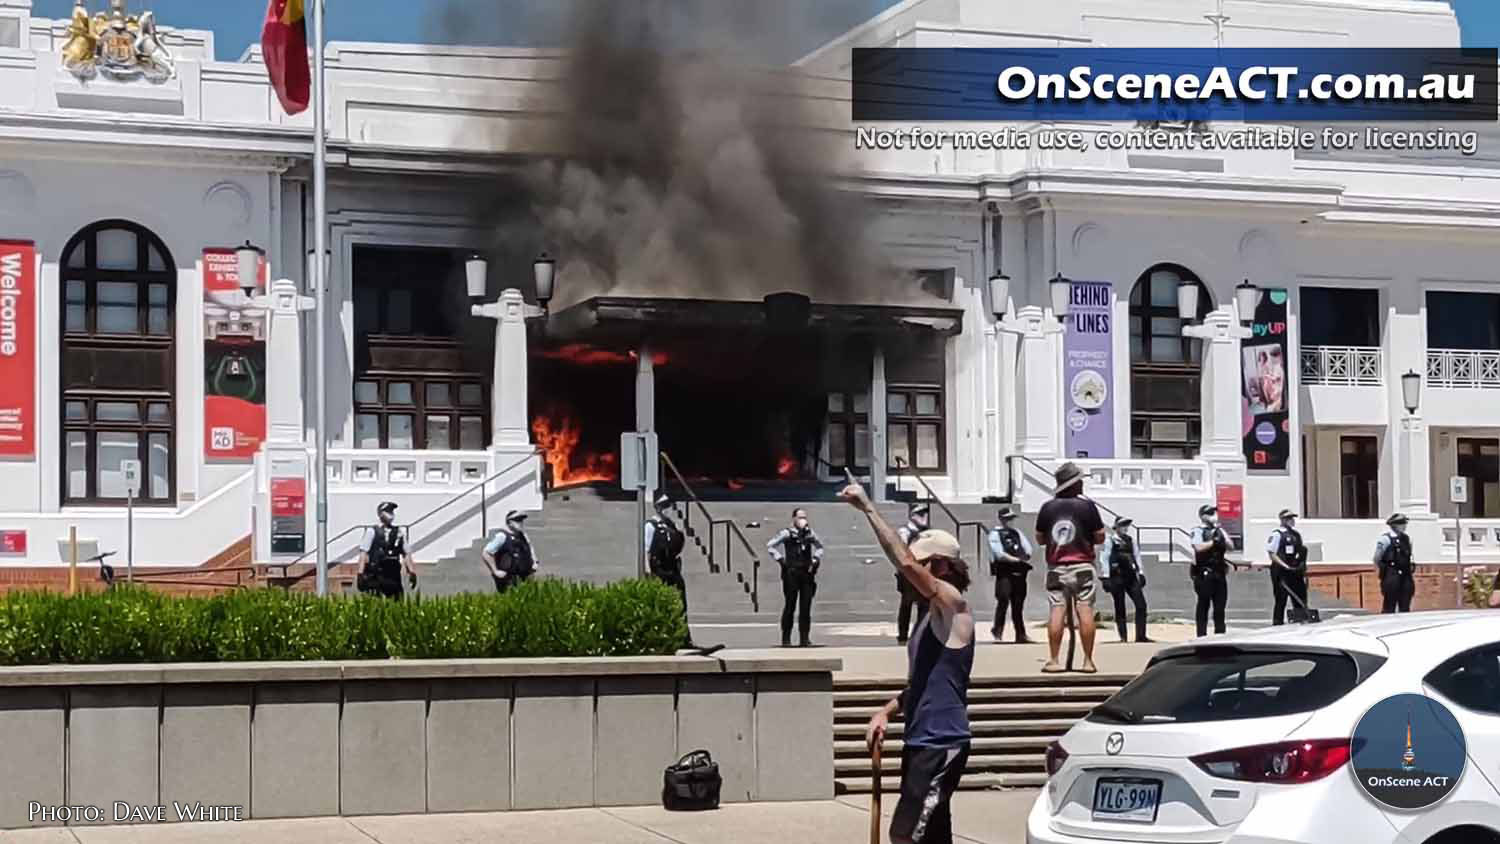 Old parliament house set on fire during protests in Canberra